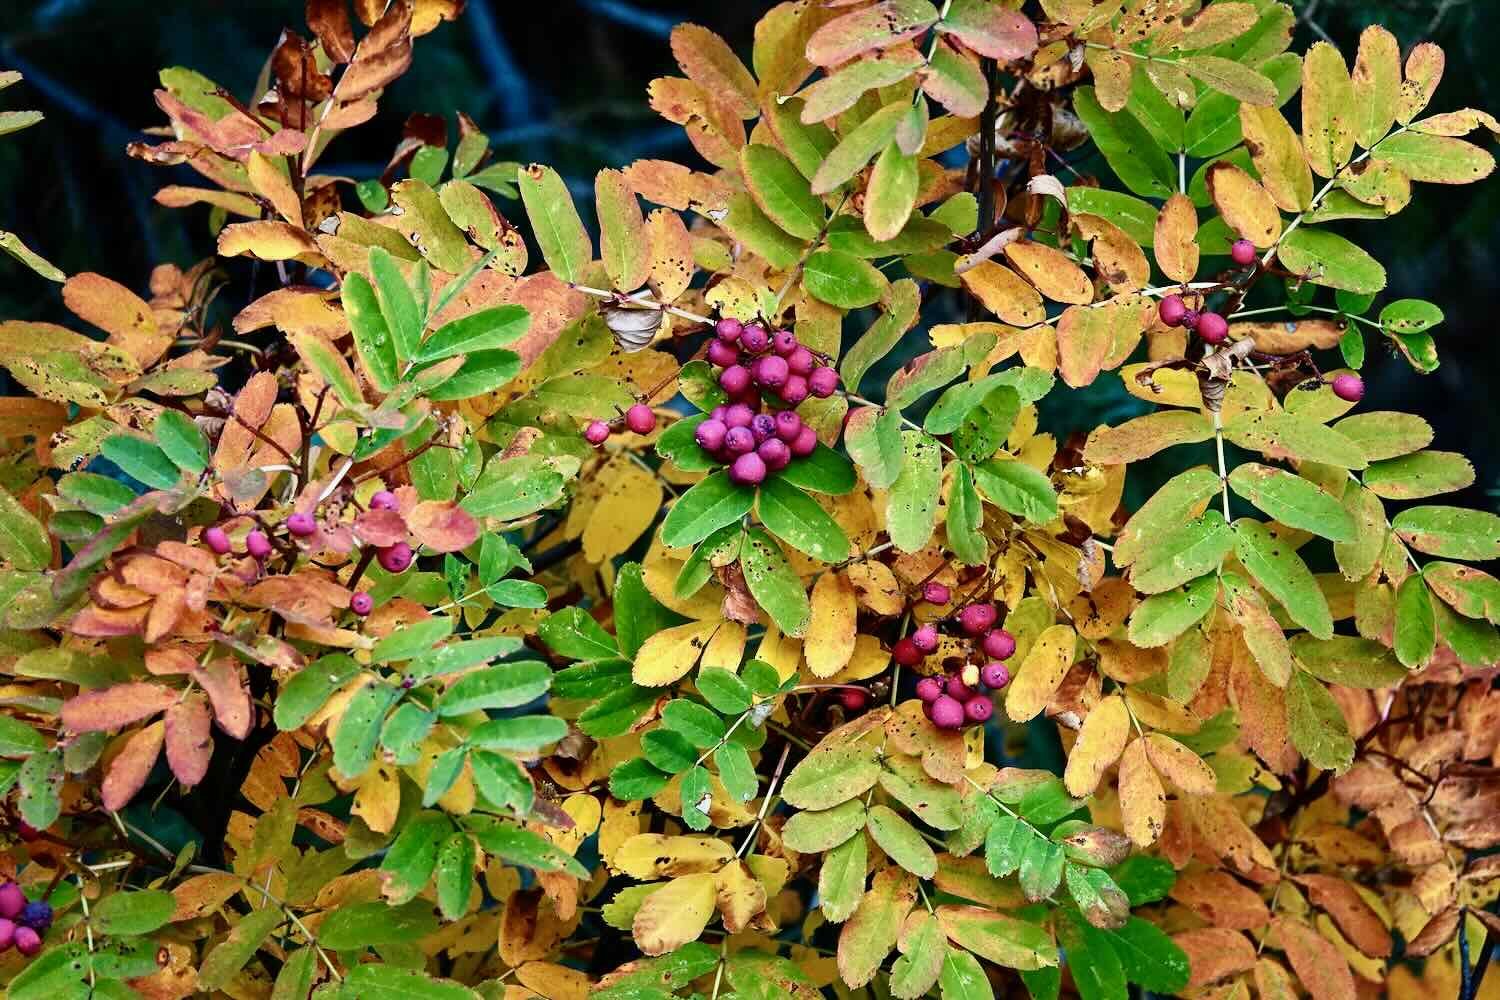 The bright, purple berries of Sitka mountain ash